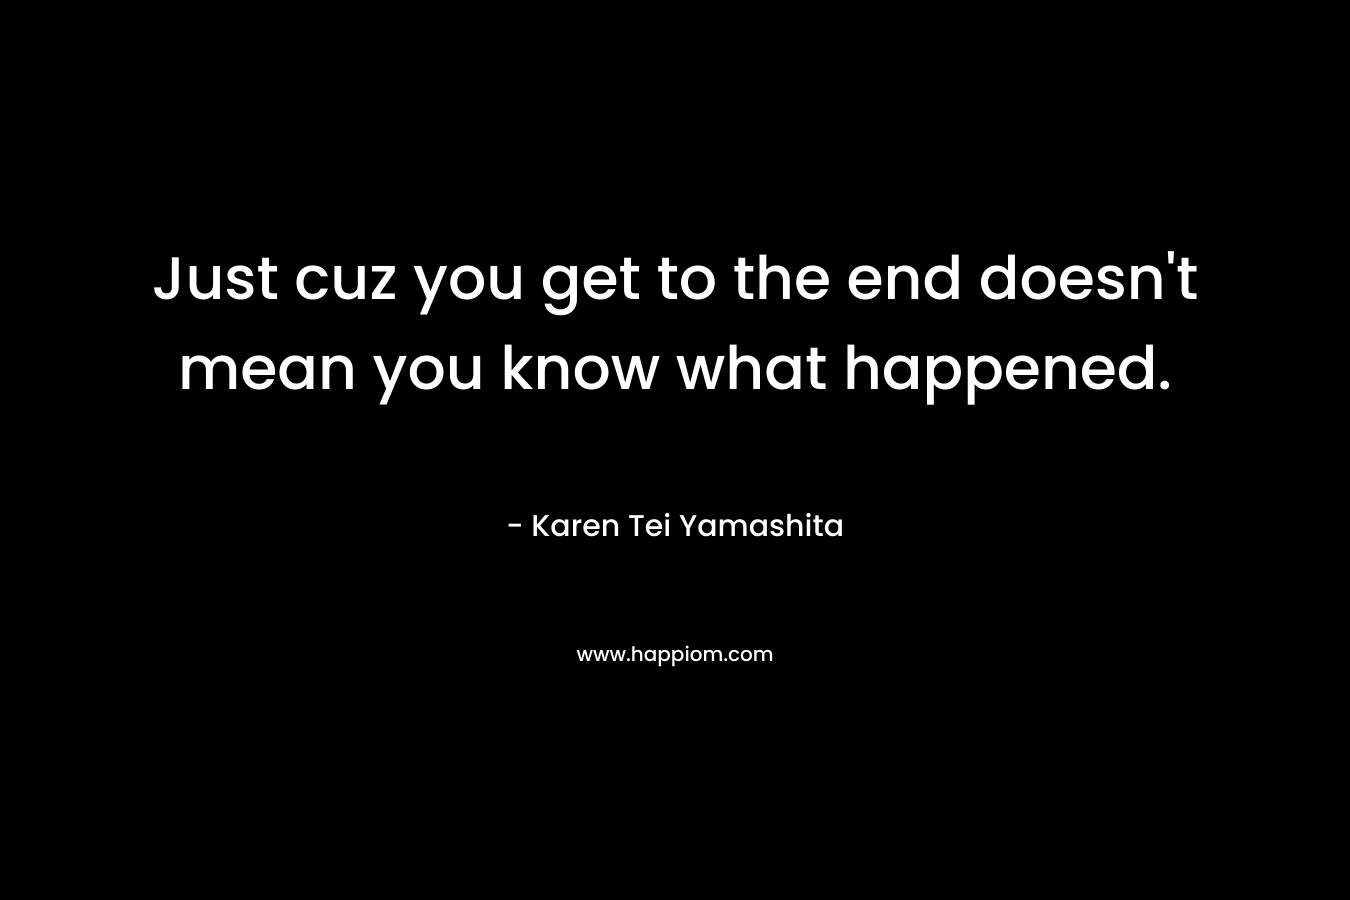 Just cuz you get to the end doesn’t mean you know what happened. – Karen Tei Yamashita